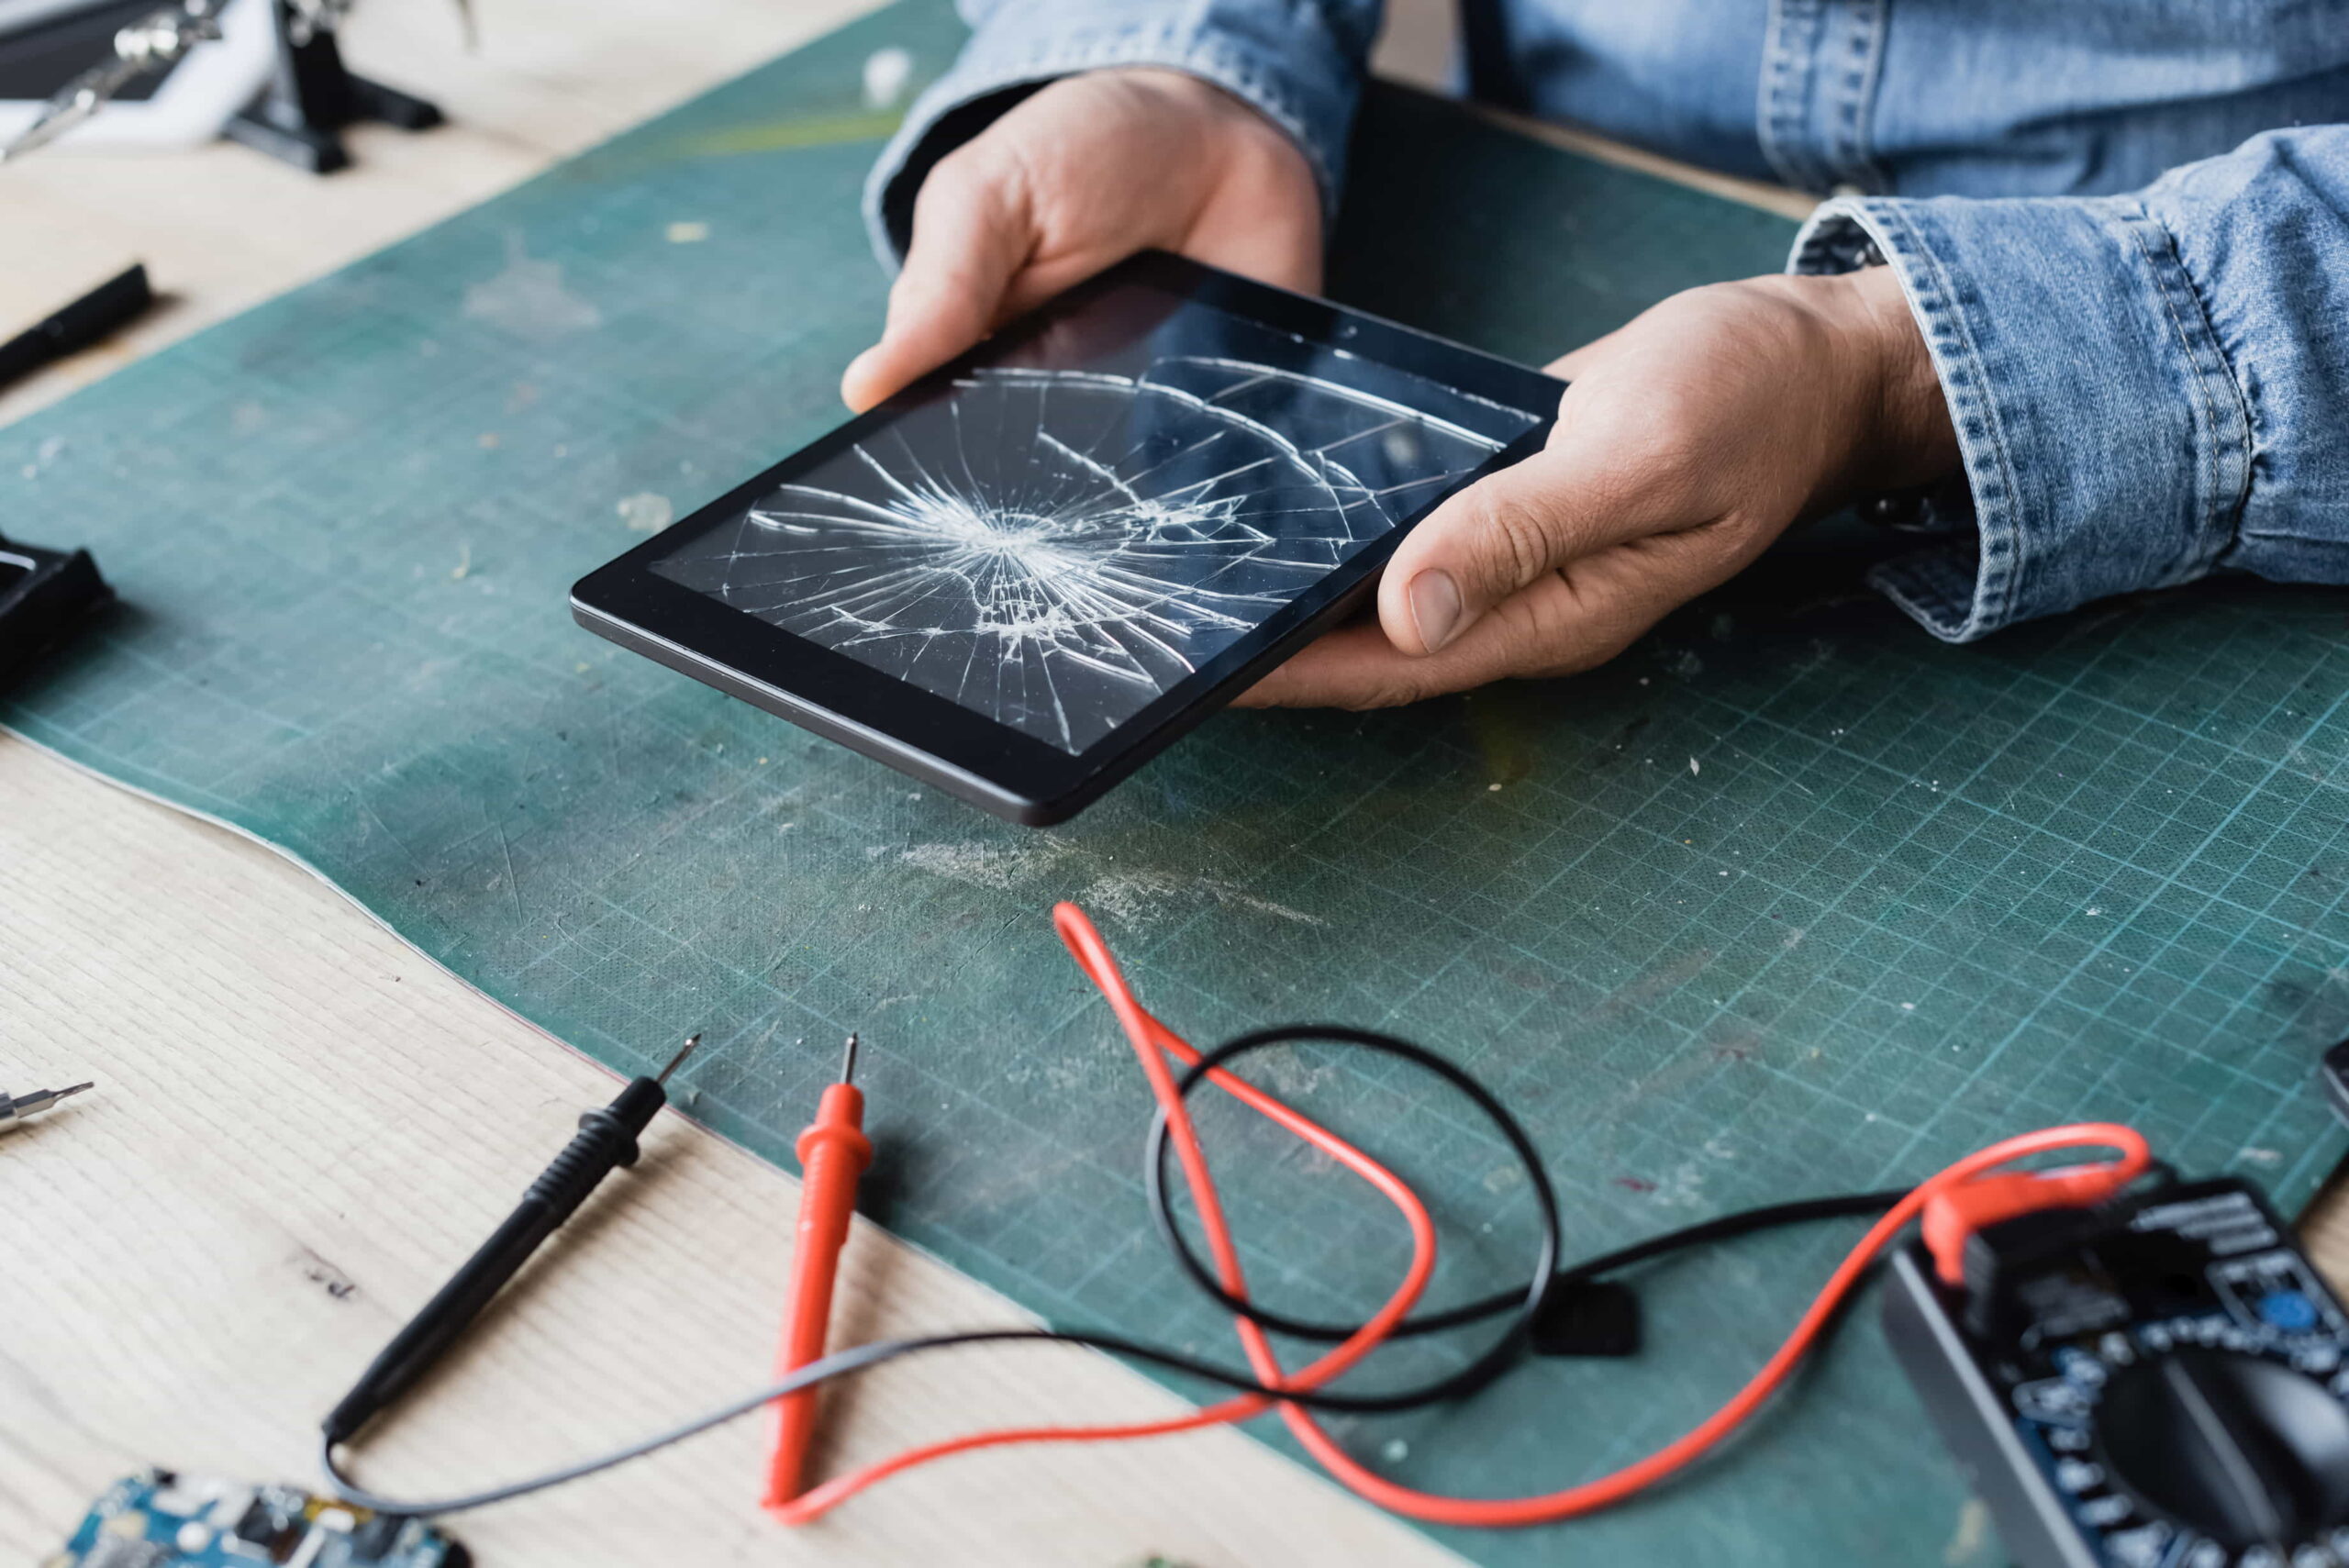 Closeup of a person holding a tablet with a cracked screen at a workshop desk with some tools